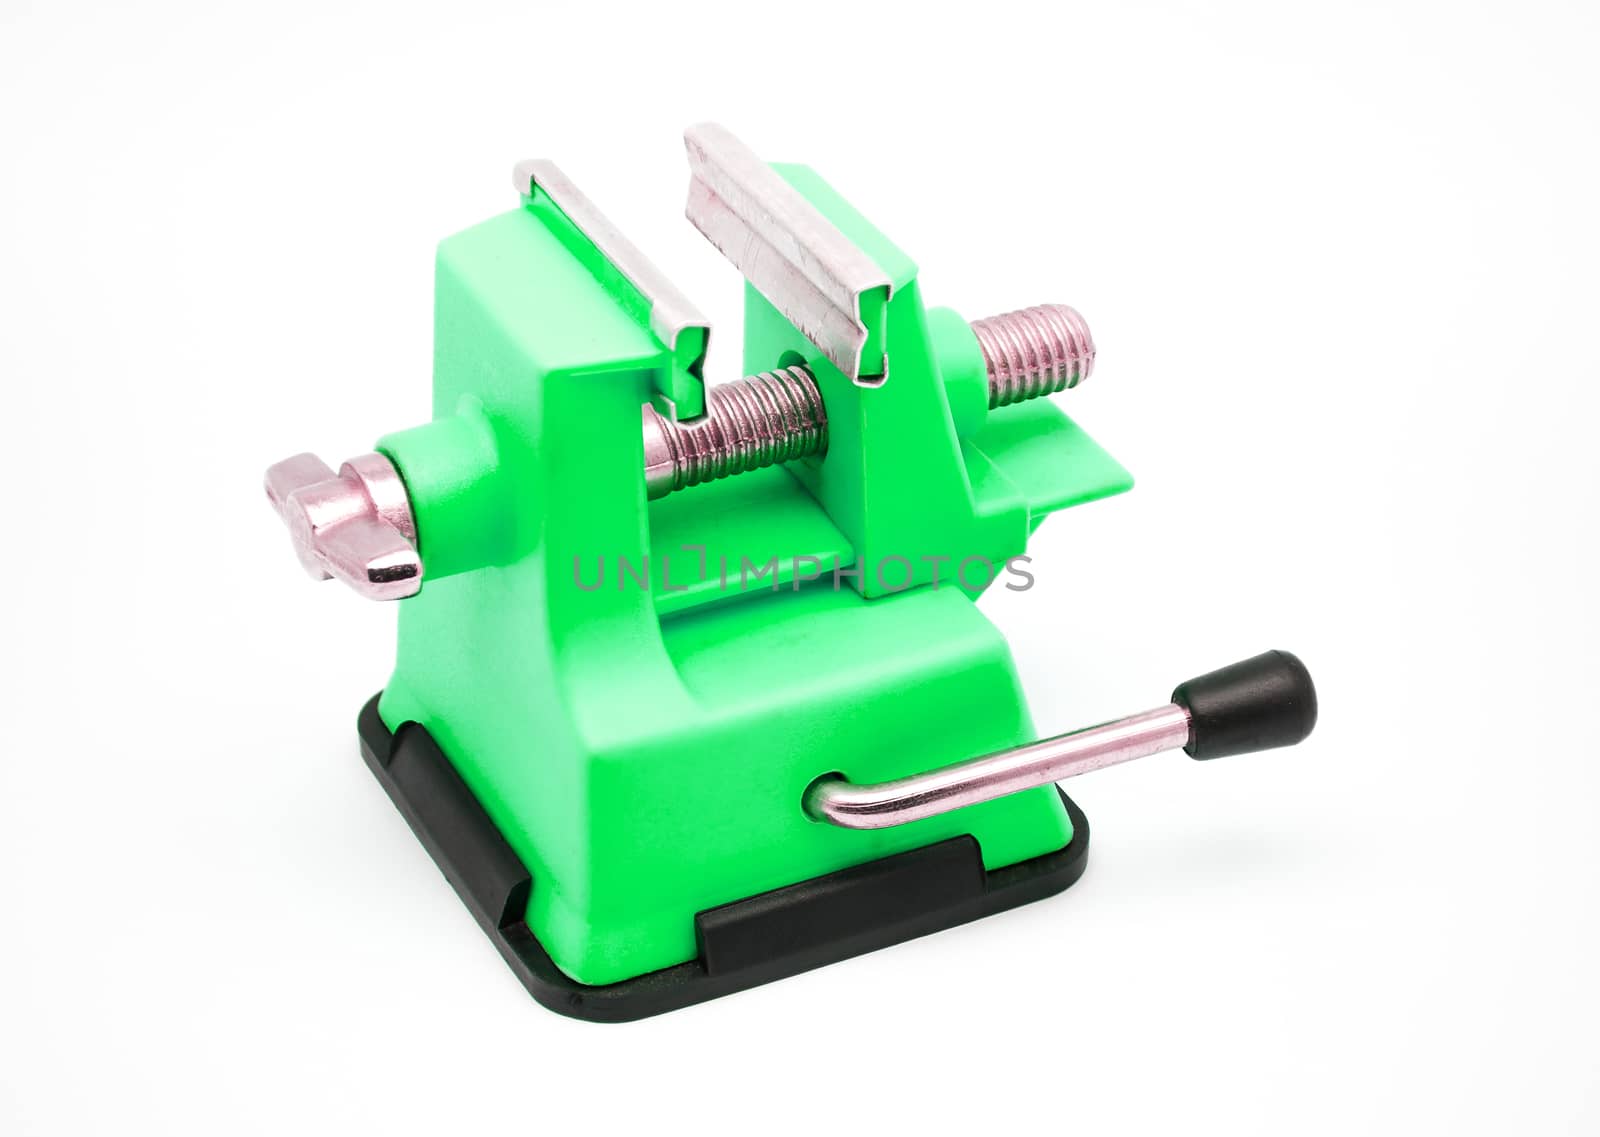 Green Plastic Bench Vise with Suction Cup by noneam